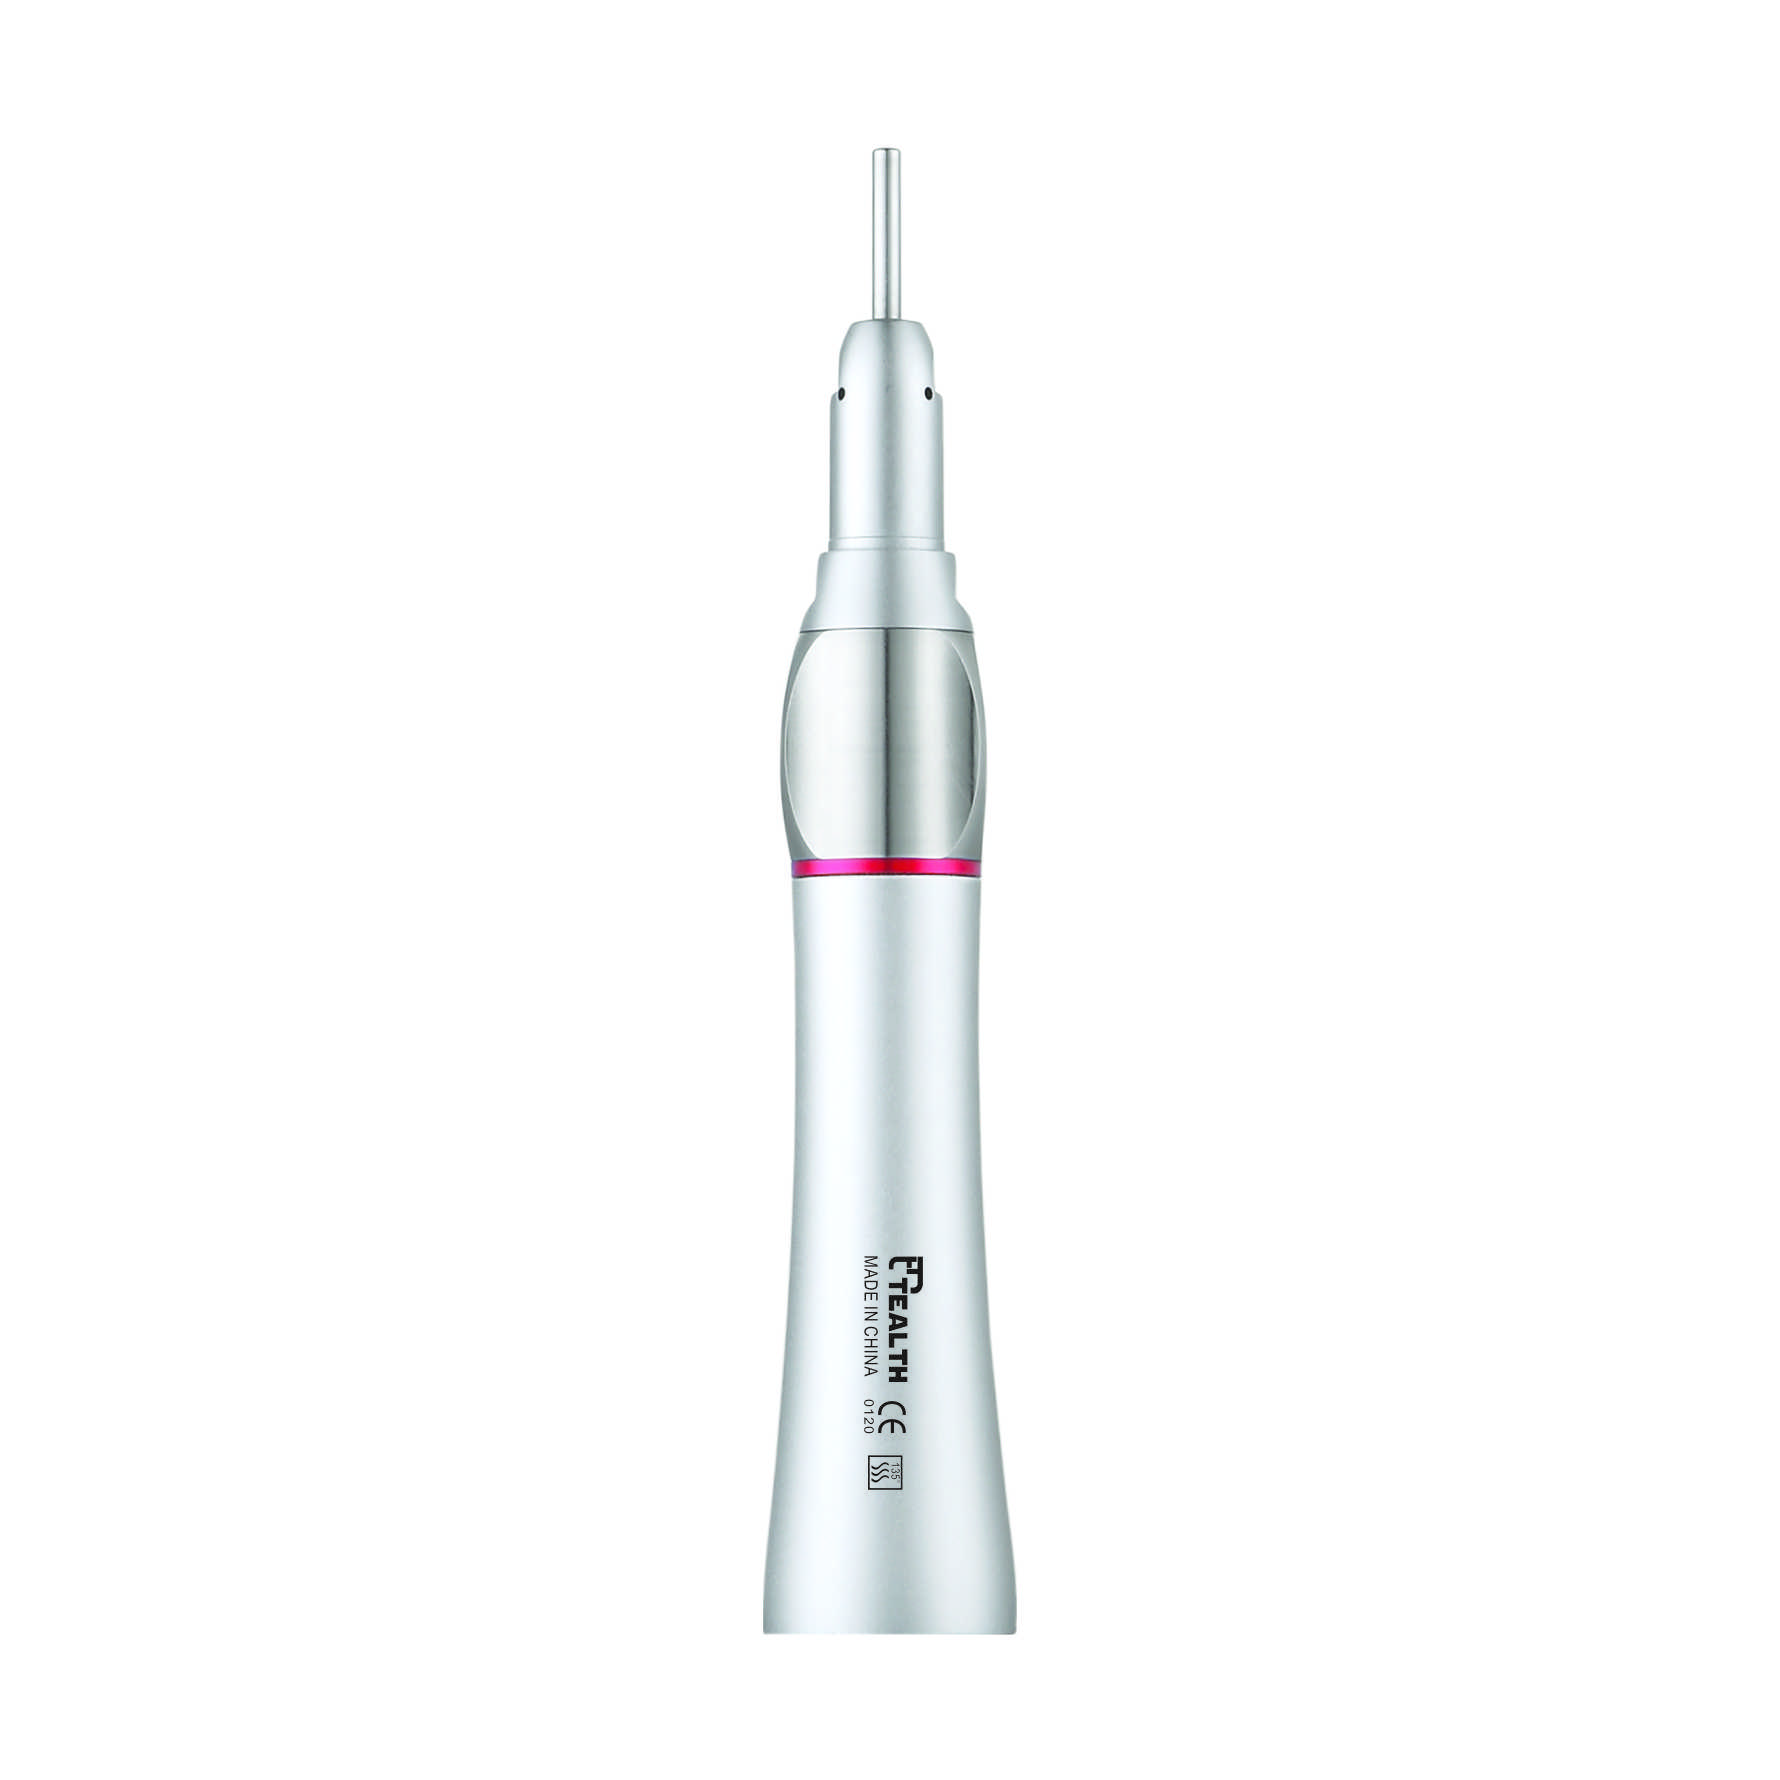 1:3 surgical straight handpiece